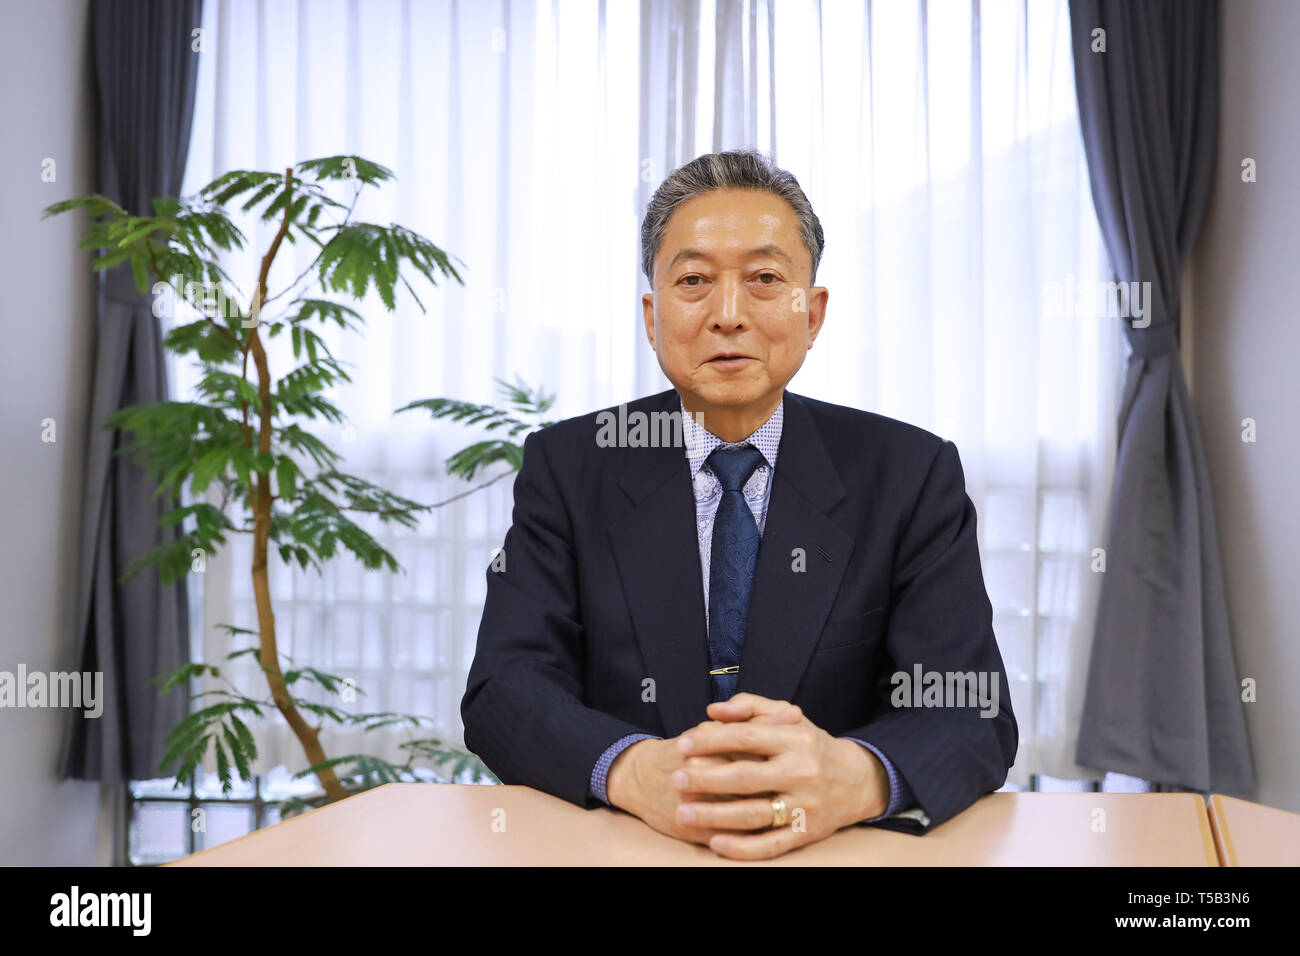 (190423) -- TOKYO, April 23, 2019 (Xinhua) -- Former Japanese Prime Minister Yukio Hatoyama is seen in Tokyo, Japan, March 4, 2019. China-proposed Belt and Road Initiative (BRI) has greatly helped enhance regional peace and prosperity, Yukio Hatoyama has said in an exclusive interview with Xinhua. Hatoyama is expected to attend the second Belt and Road Forum for International Cooperation (BRF), to be held in Beijing, capital of China, on April 25-27, with the theme of Belt and Road Cooperation, Shaping a Brighter Shared Future. (Xinhua/Du Xiaoyi) Stock Photo